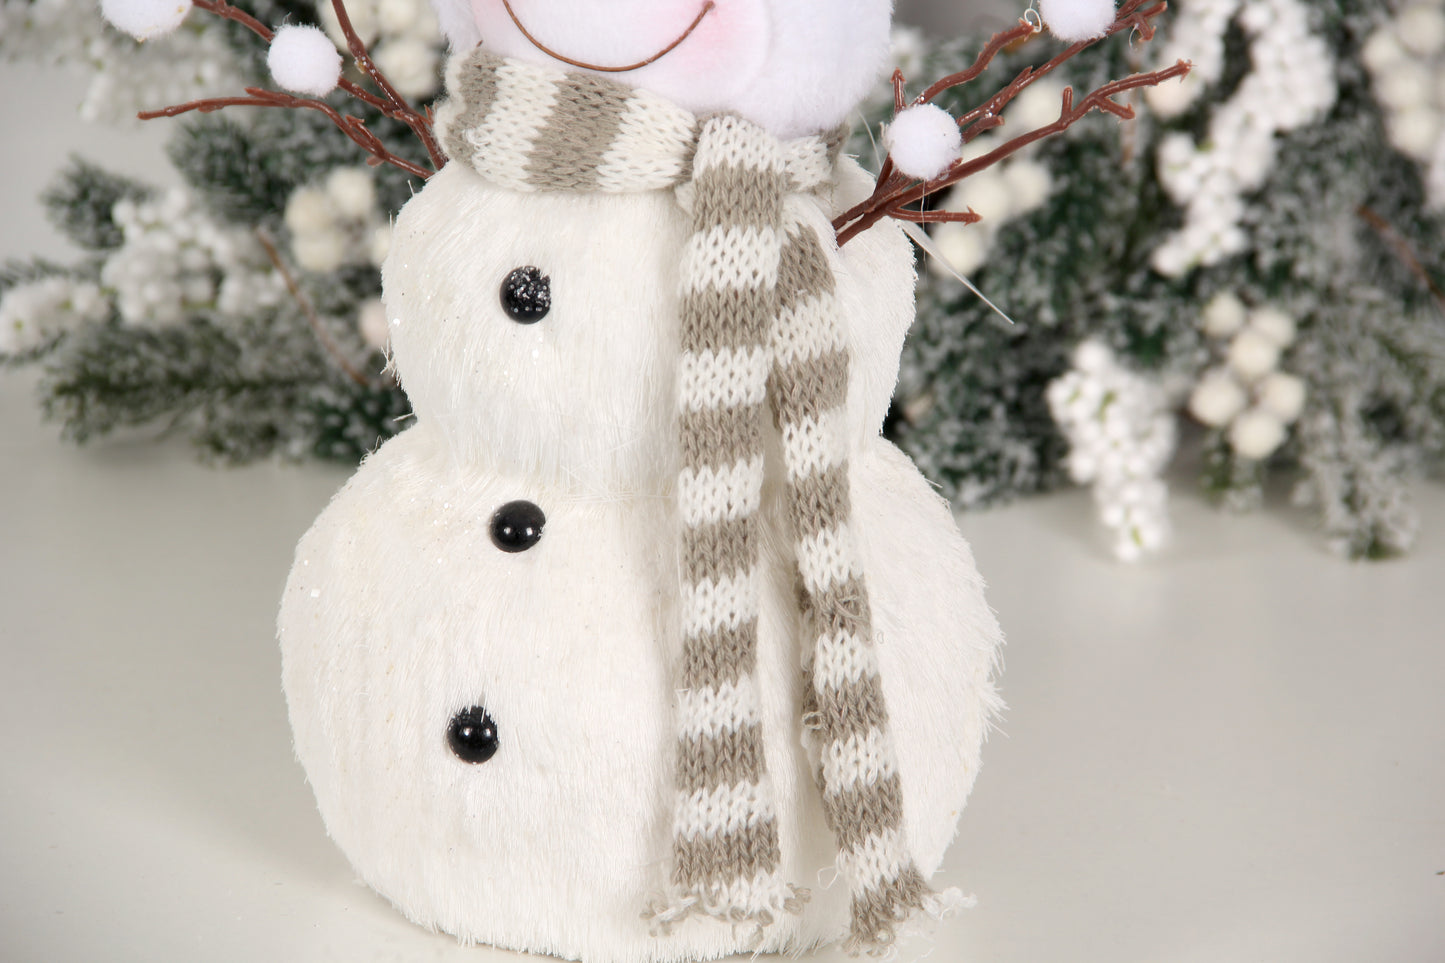 34cm Snowman Decorating Make a Snowman Winter Holiday Outdoor Decoration